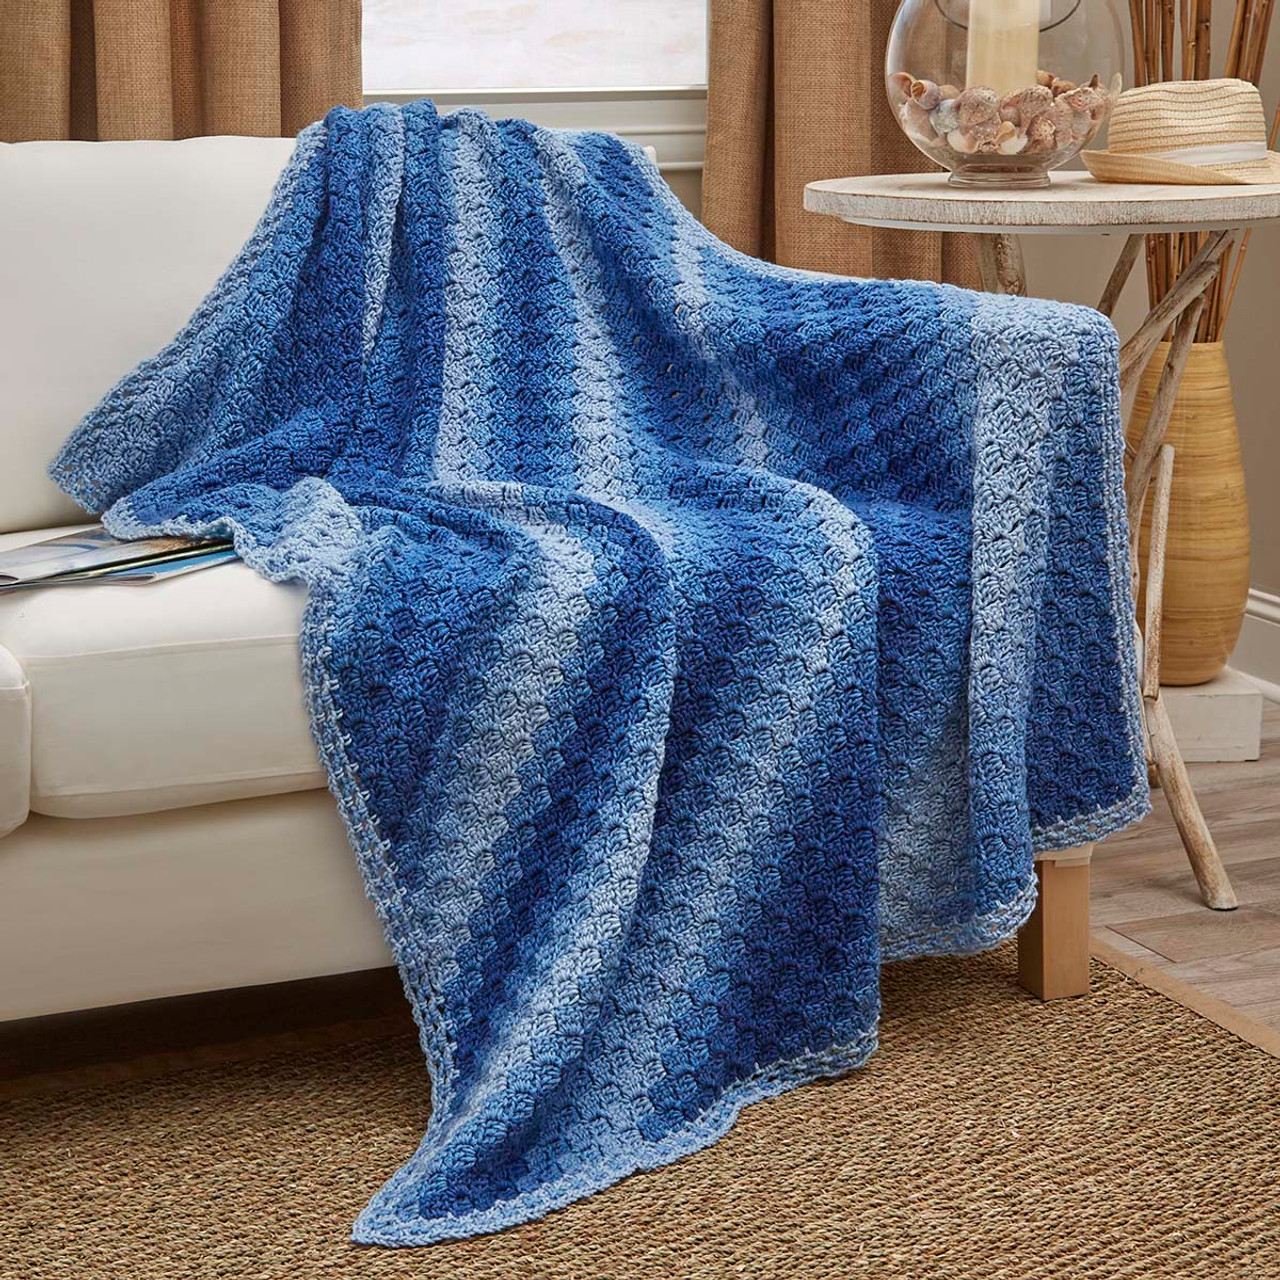 Beginners Chequered Large Blanket Crochet Kit Blue Easy Beginners Blanket  Throw Blanket Pattern by Wool Couture 